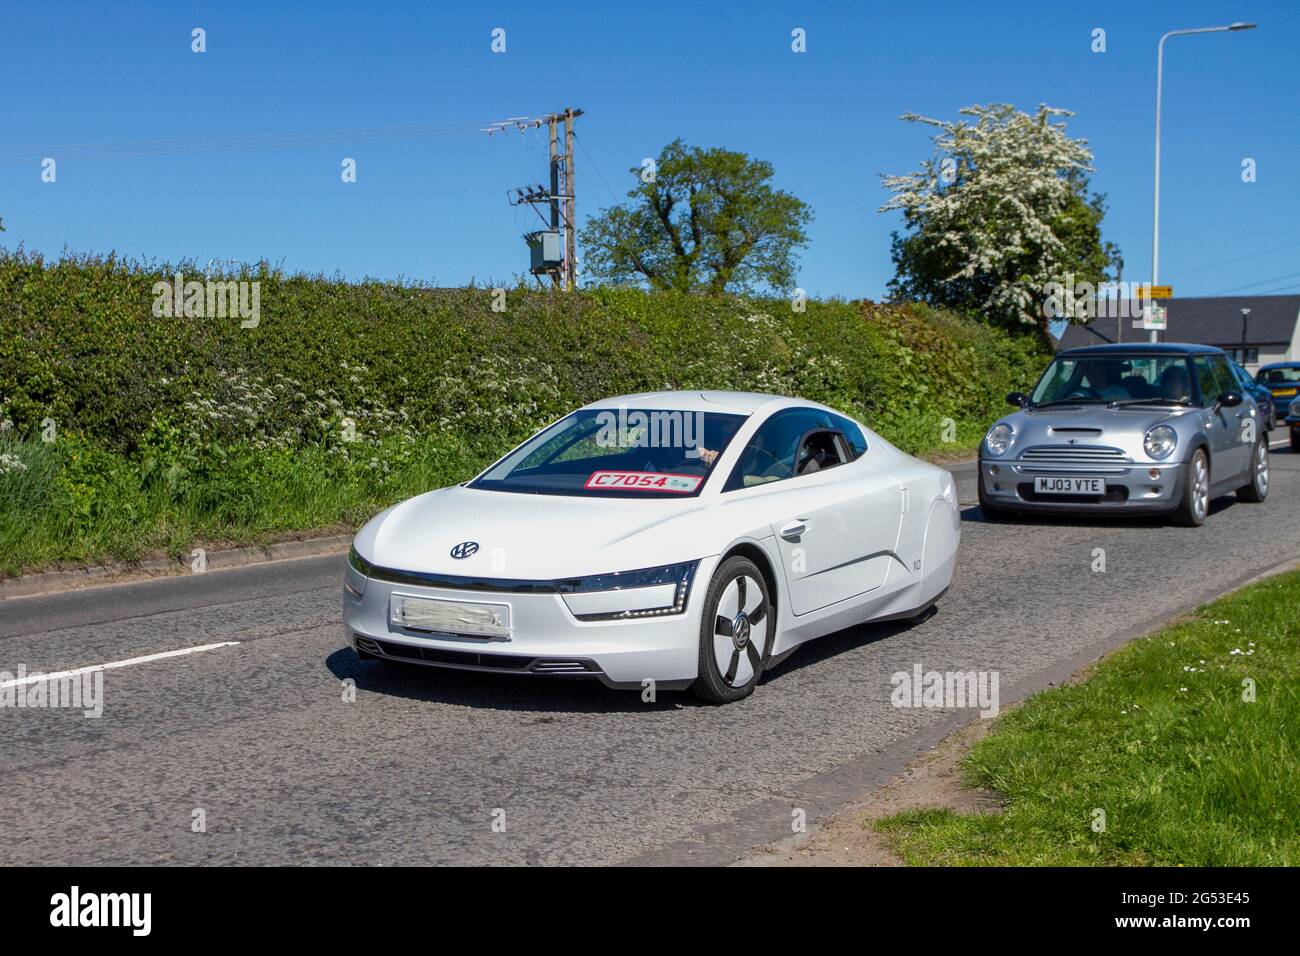 VW Volkswagen XL1 All electric white concept car, en-route to Capesthorne Hall classic May car show, Cheshire, UK. Ultra-Rare 2015 Volkswagen XL1 Diesel-Hybrid Capable of 260 MPG Stock Photo